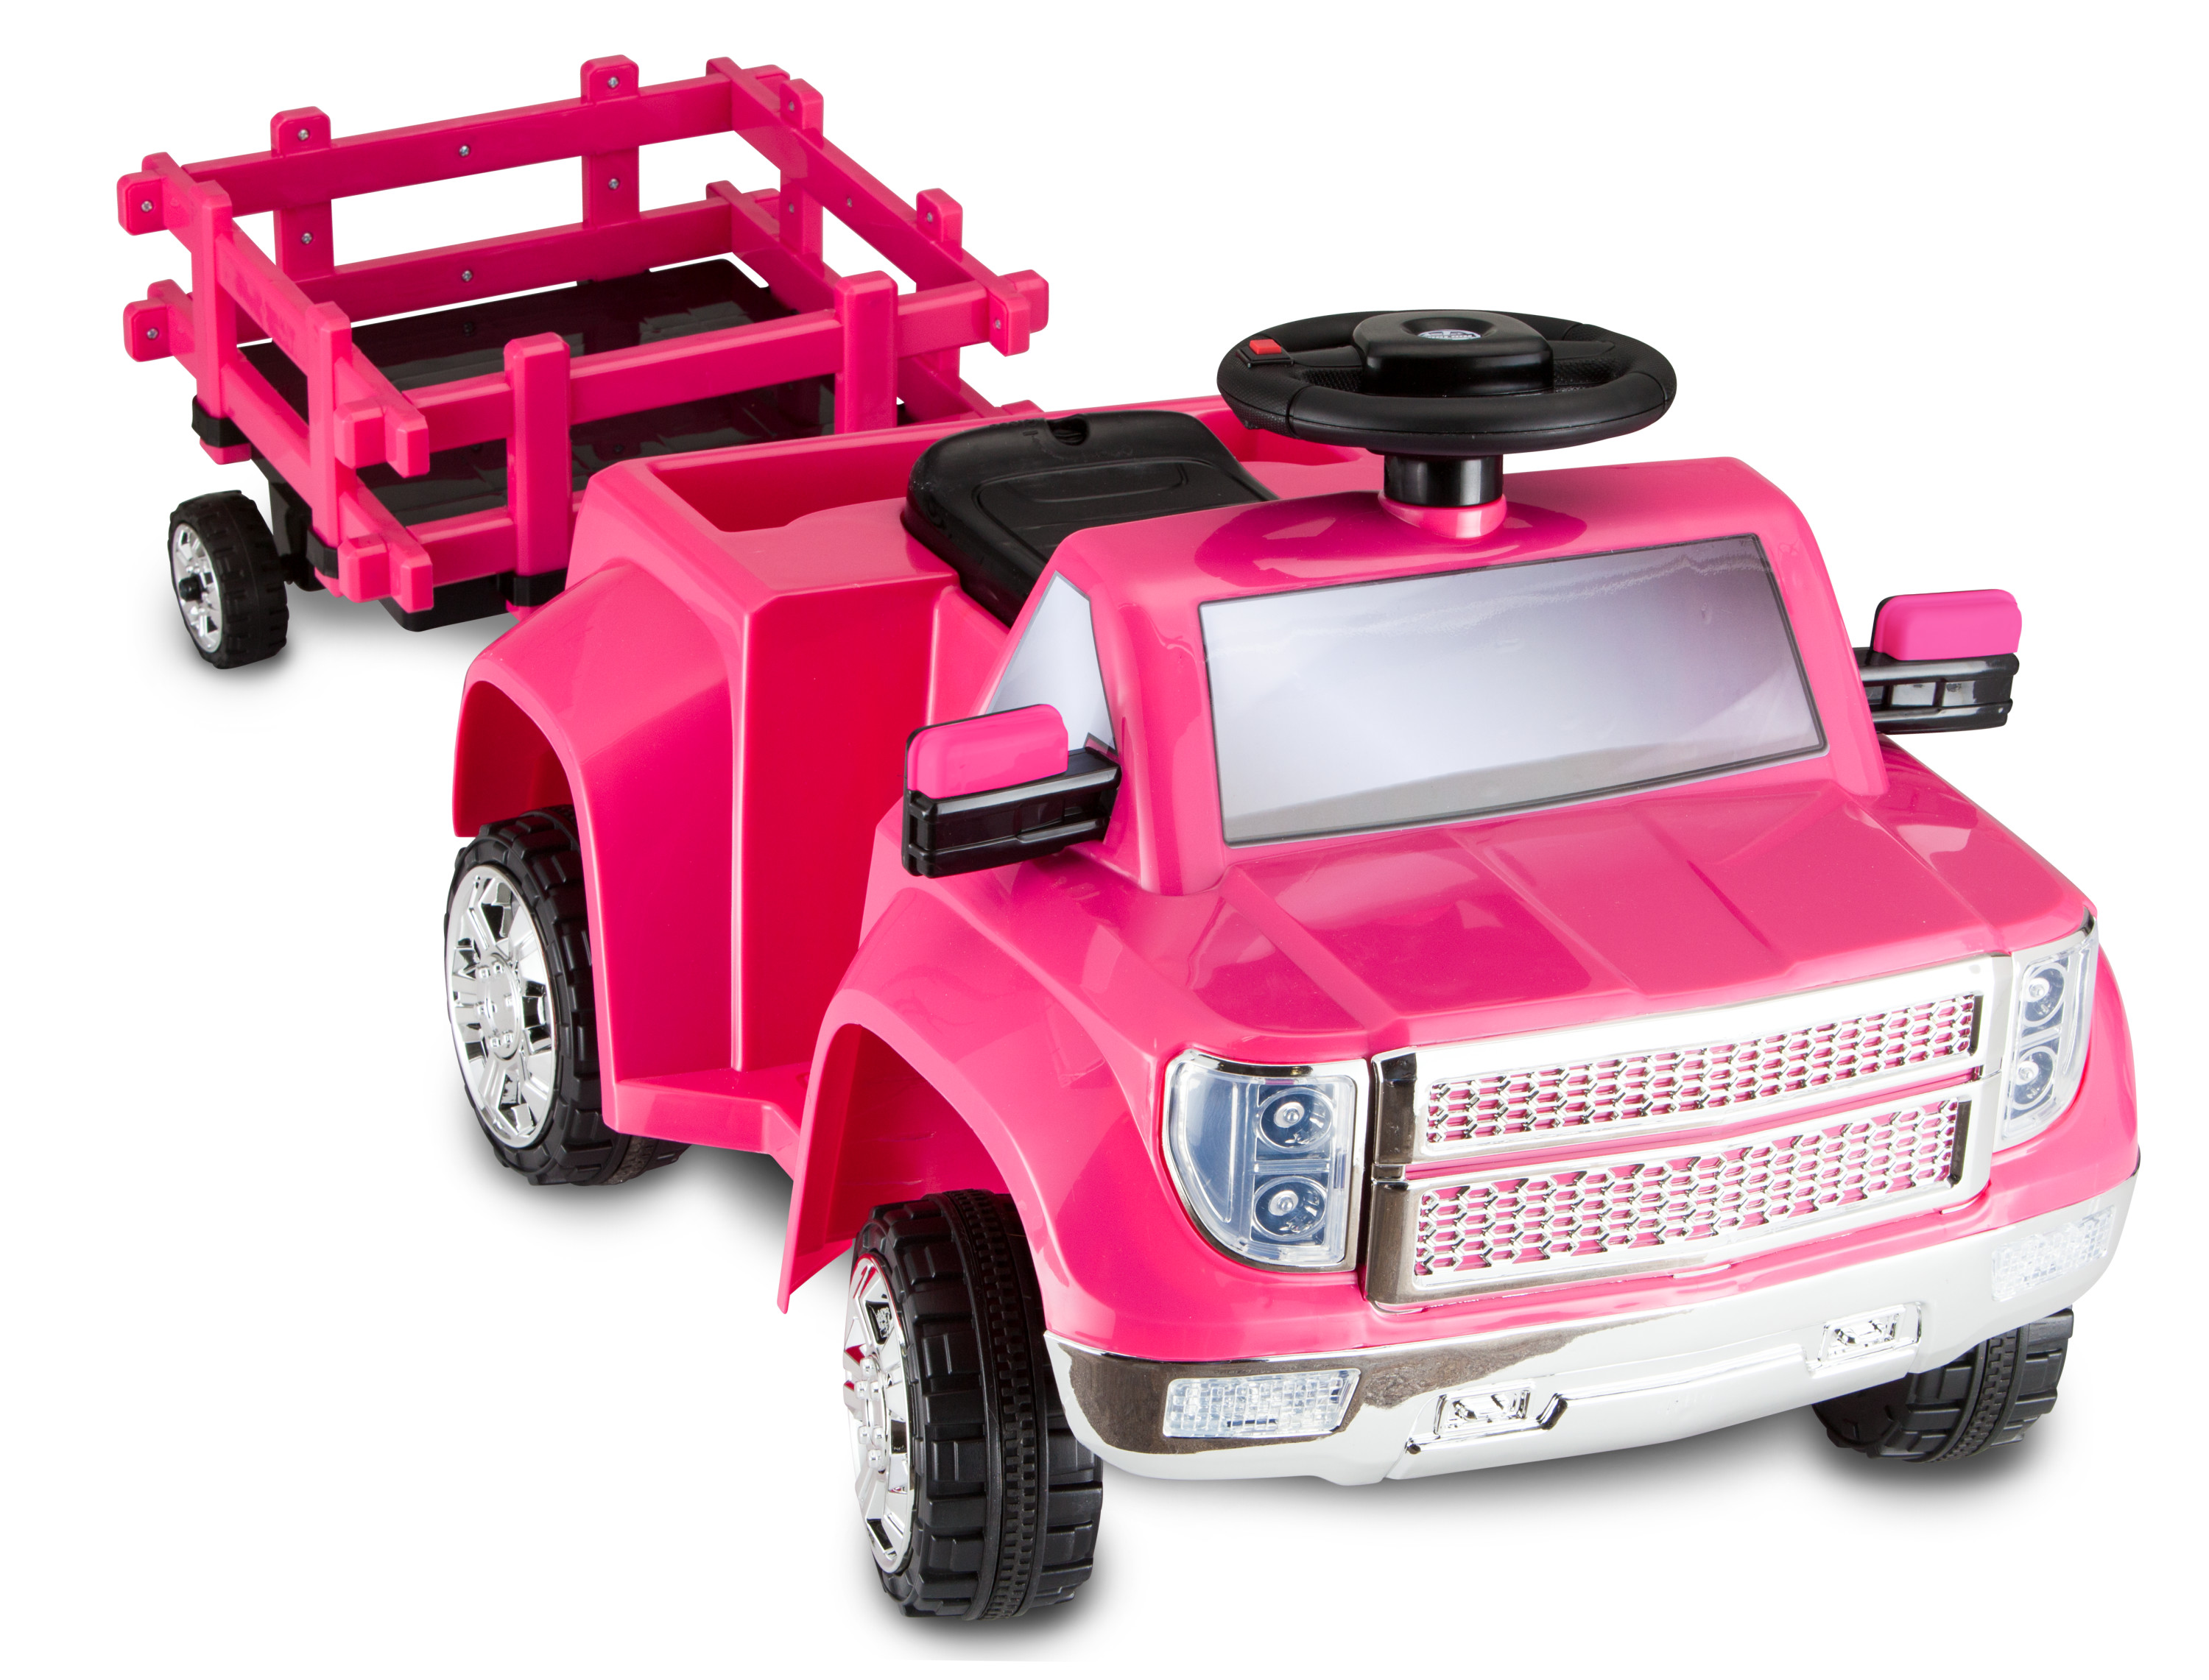 Heavy Hauling Truck with Trailer Toddler Ride-On Toy by Kid Trax, pink - image 2 of 8